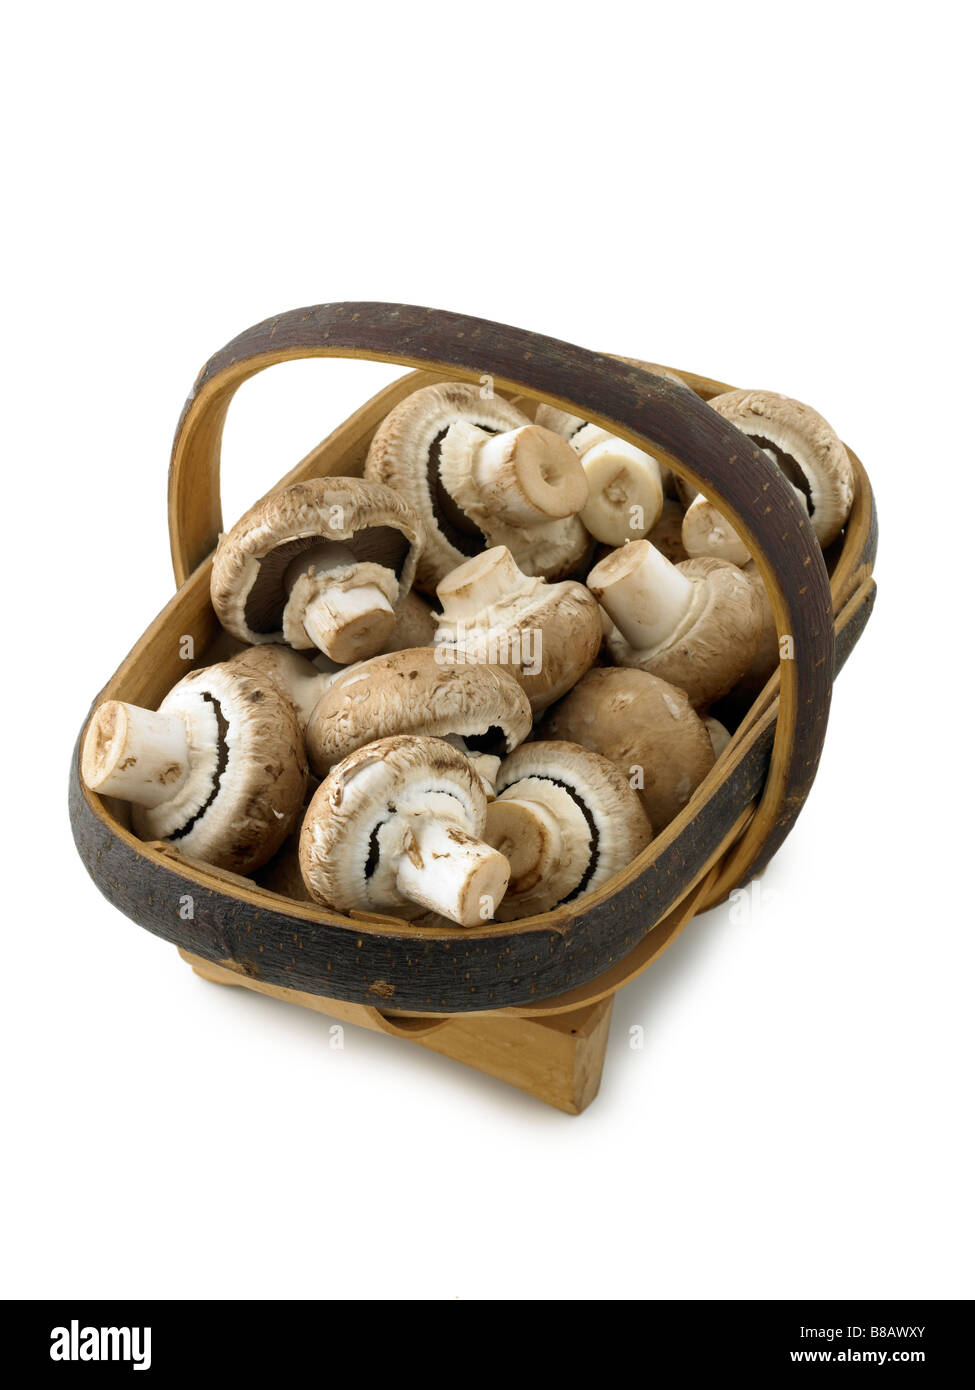 mushrooms in a basket Stock Photo